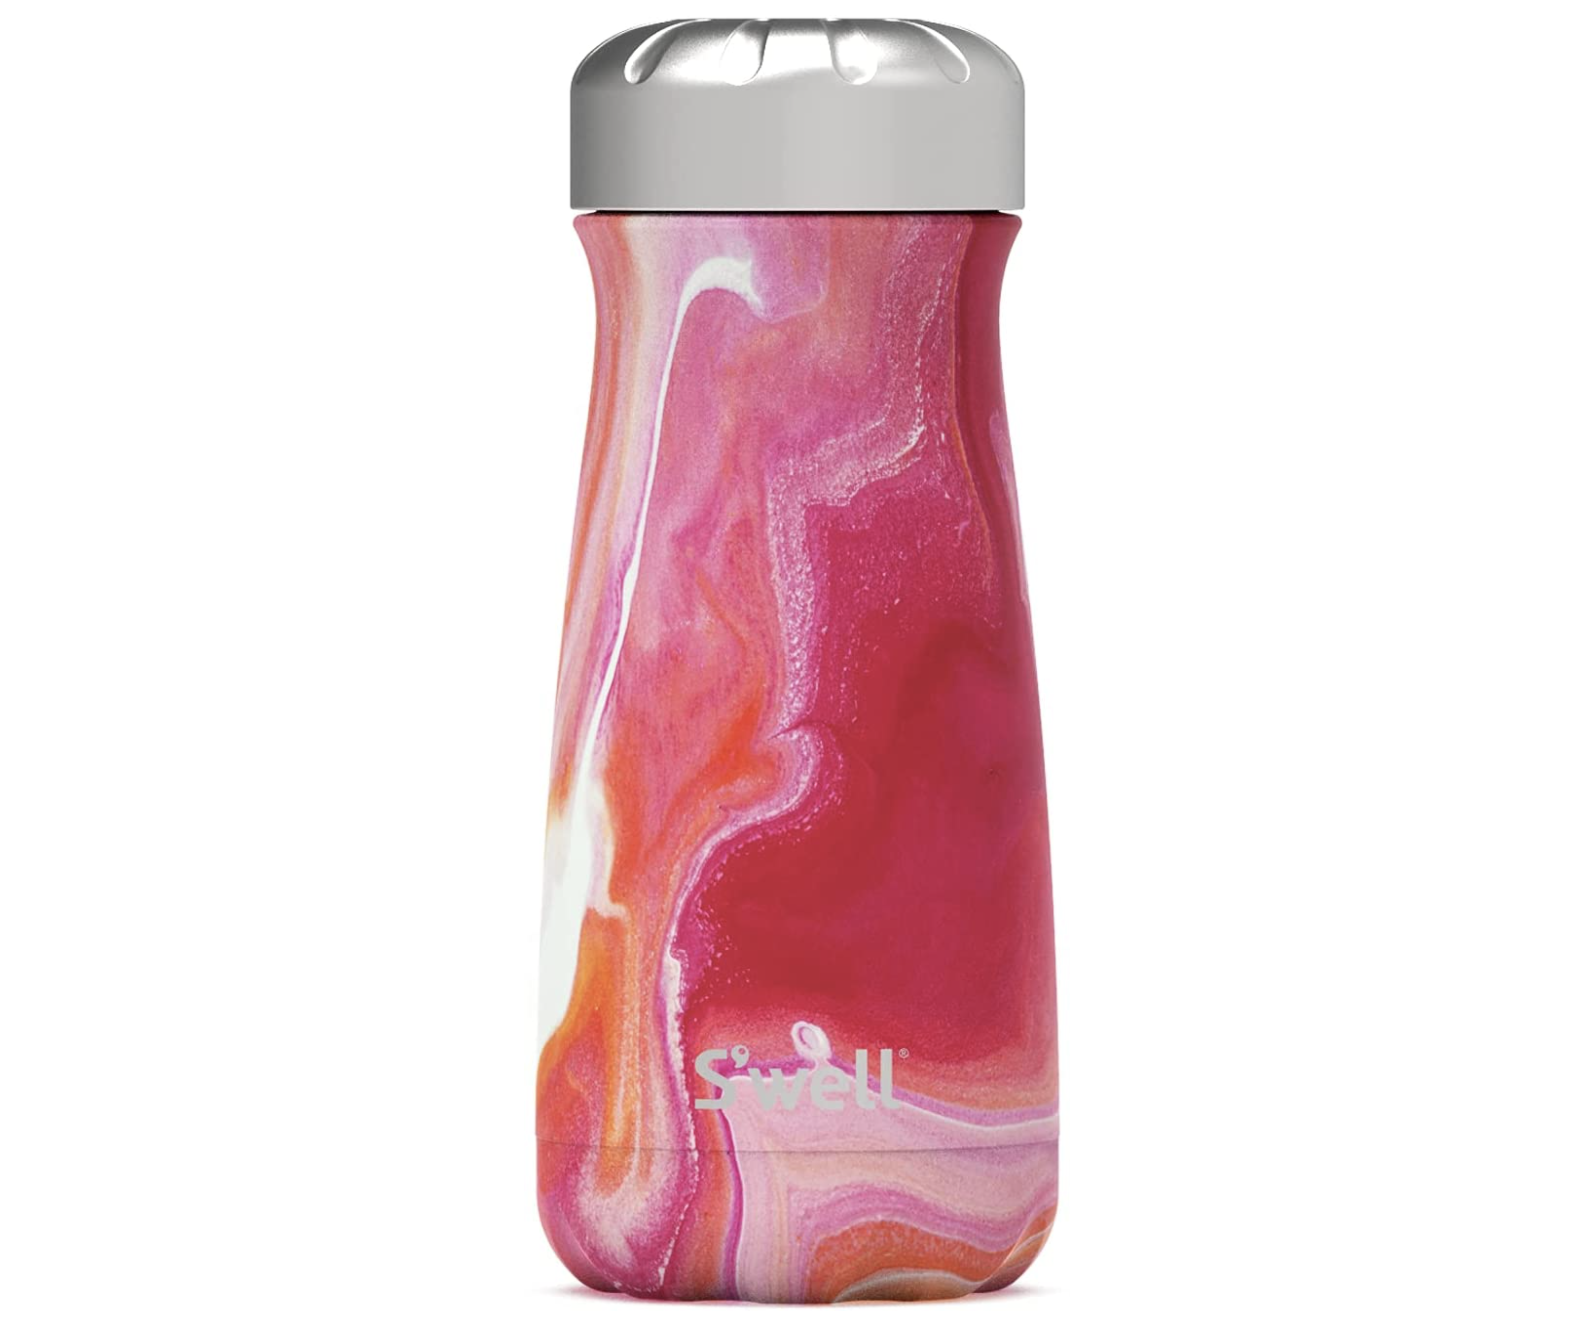 Swell Stainless Steel Traveler Travel Mug  16 Fl Oz  Rose Agate  Triple-Layered Vacuum Insulated Containers Keeps Drinks Cold for 24 Hours and Hot for 12  BPA Free Travel Water Bottle swirl pink.png